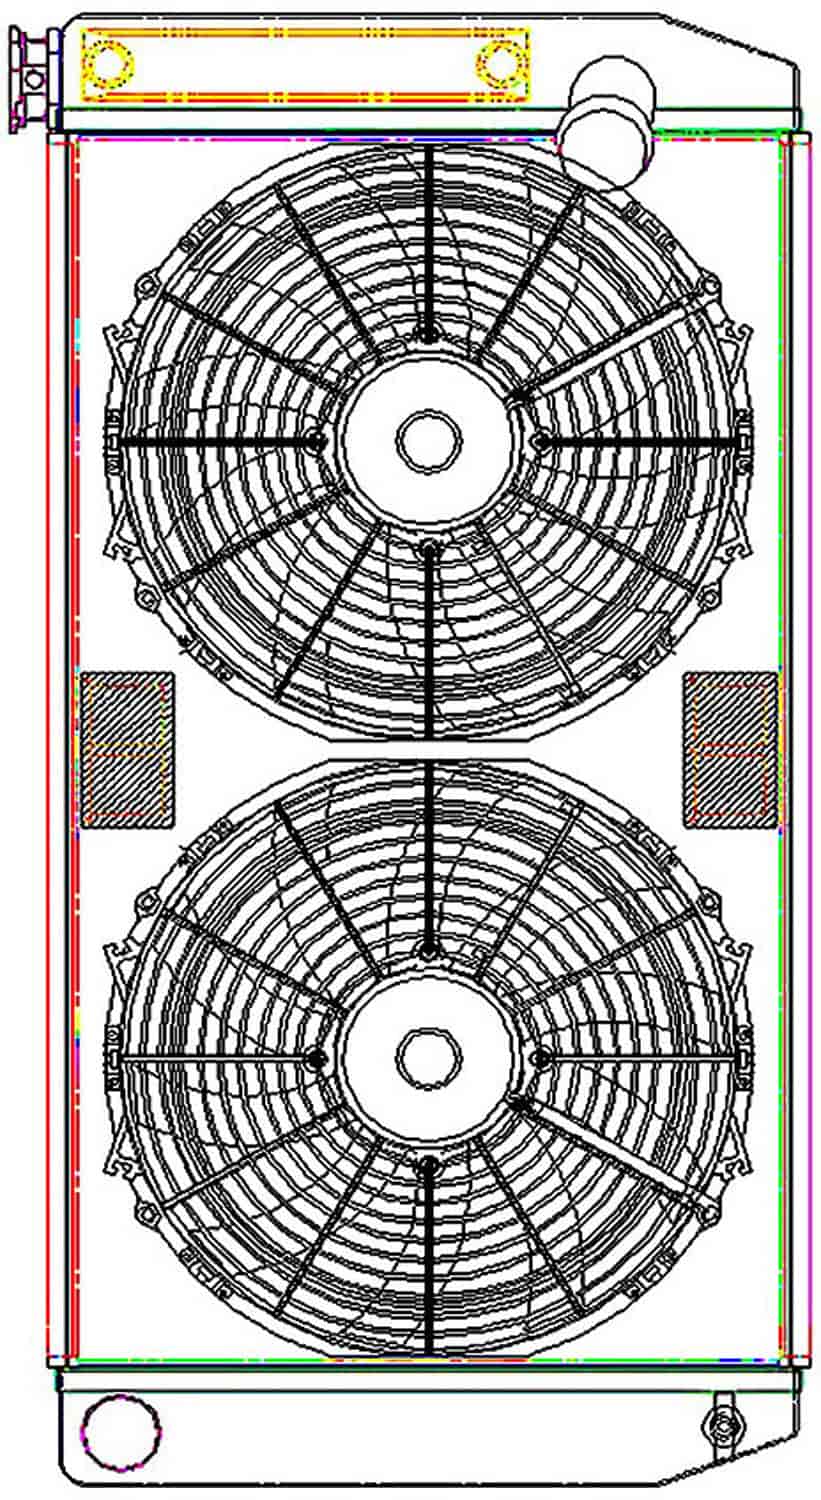 ClassicCool ComboUnit Universal Fit Radiator and Fan Single Pass Crossflow Design 31" x 15.50" with Transmission Cooler